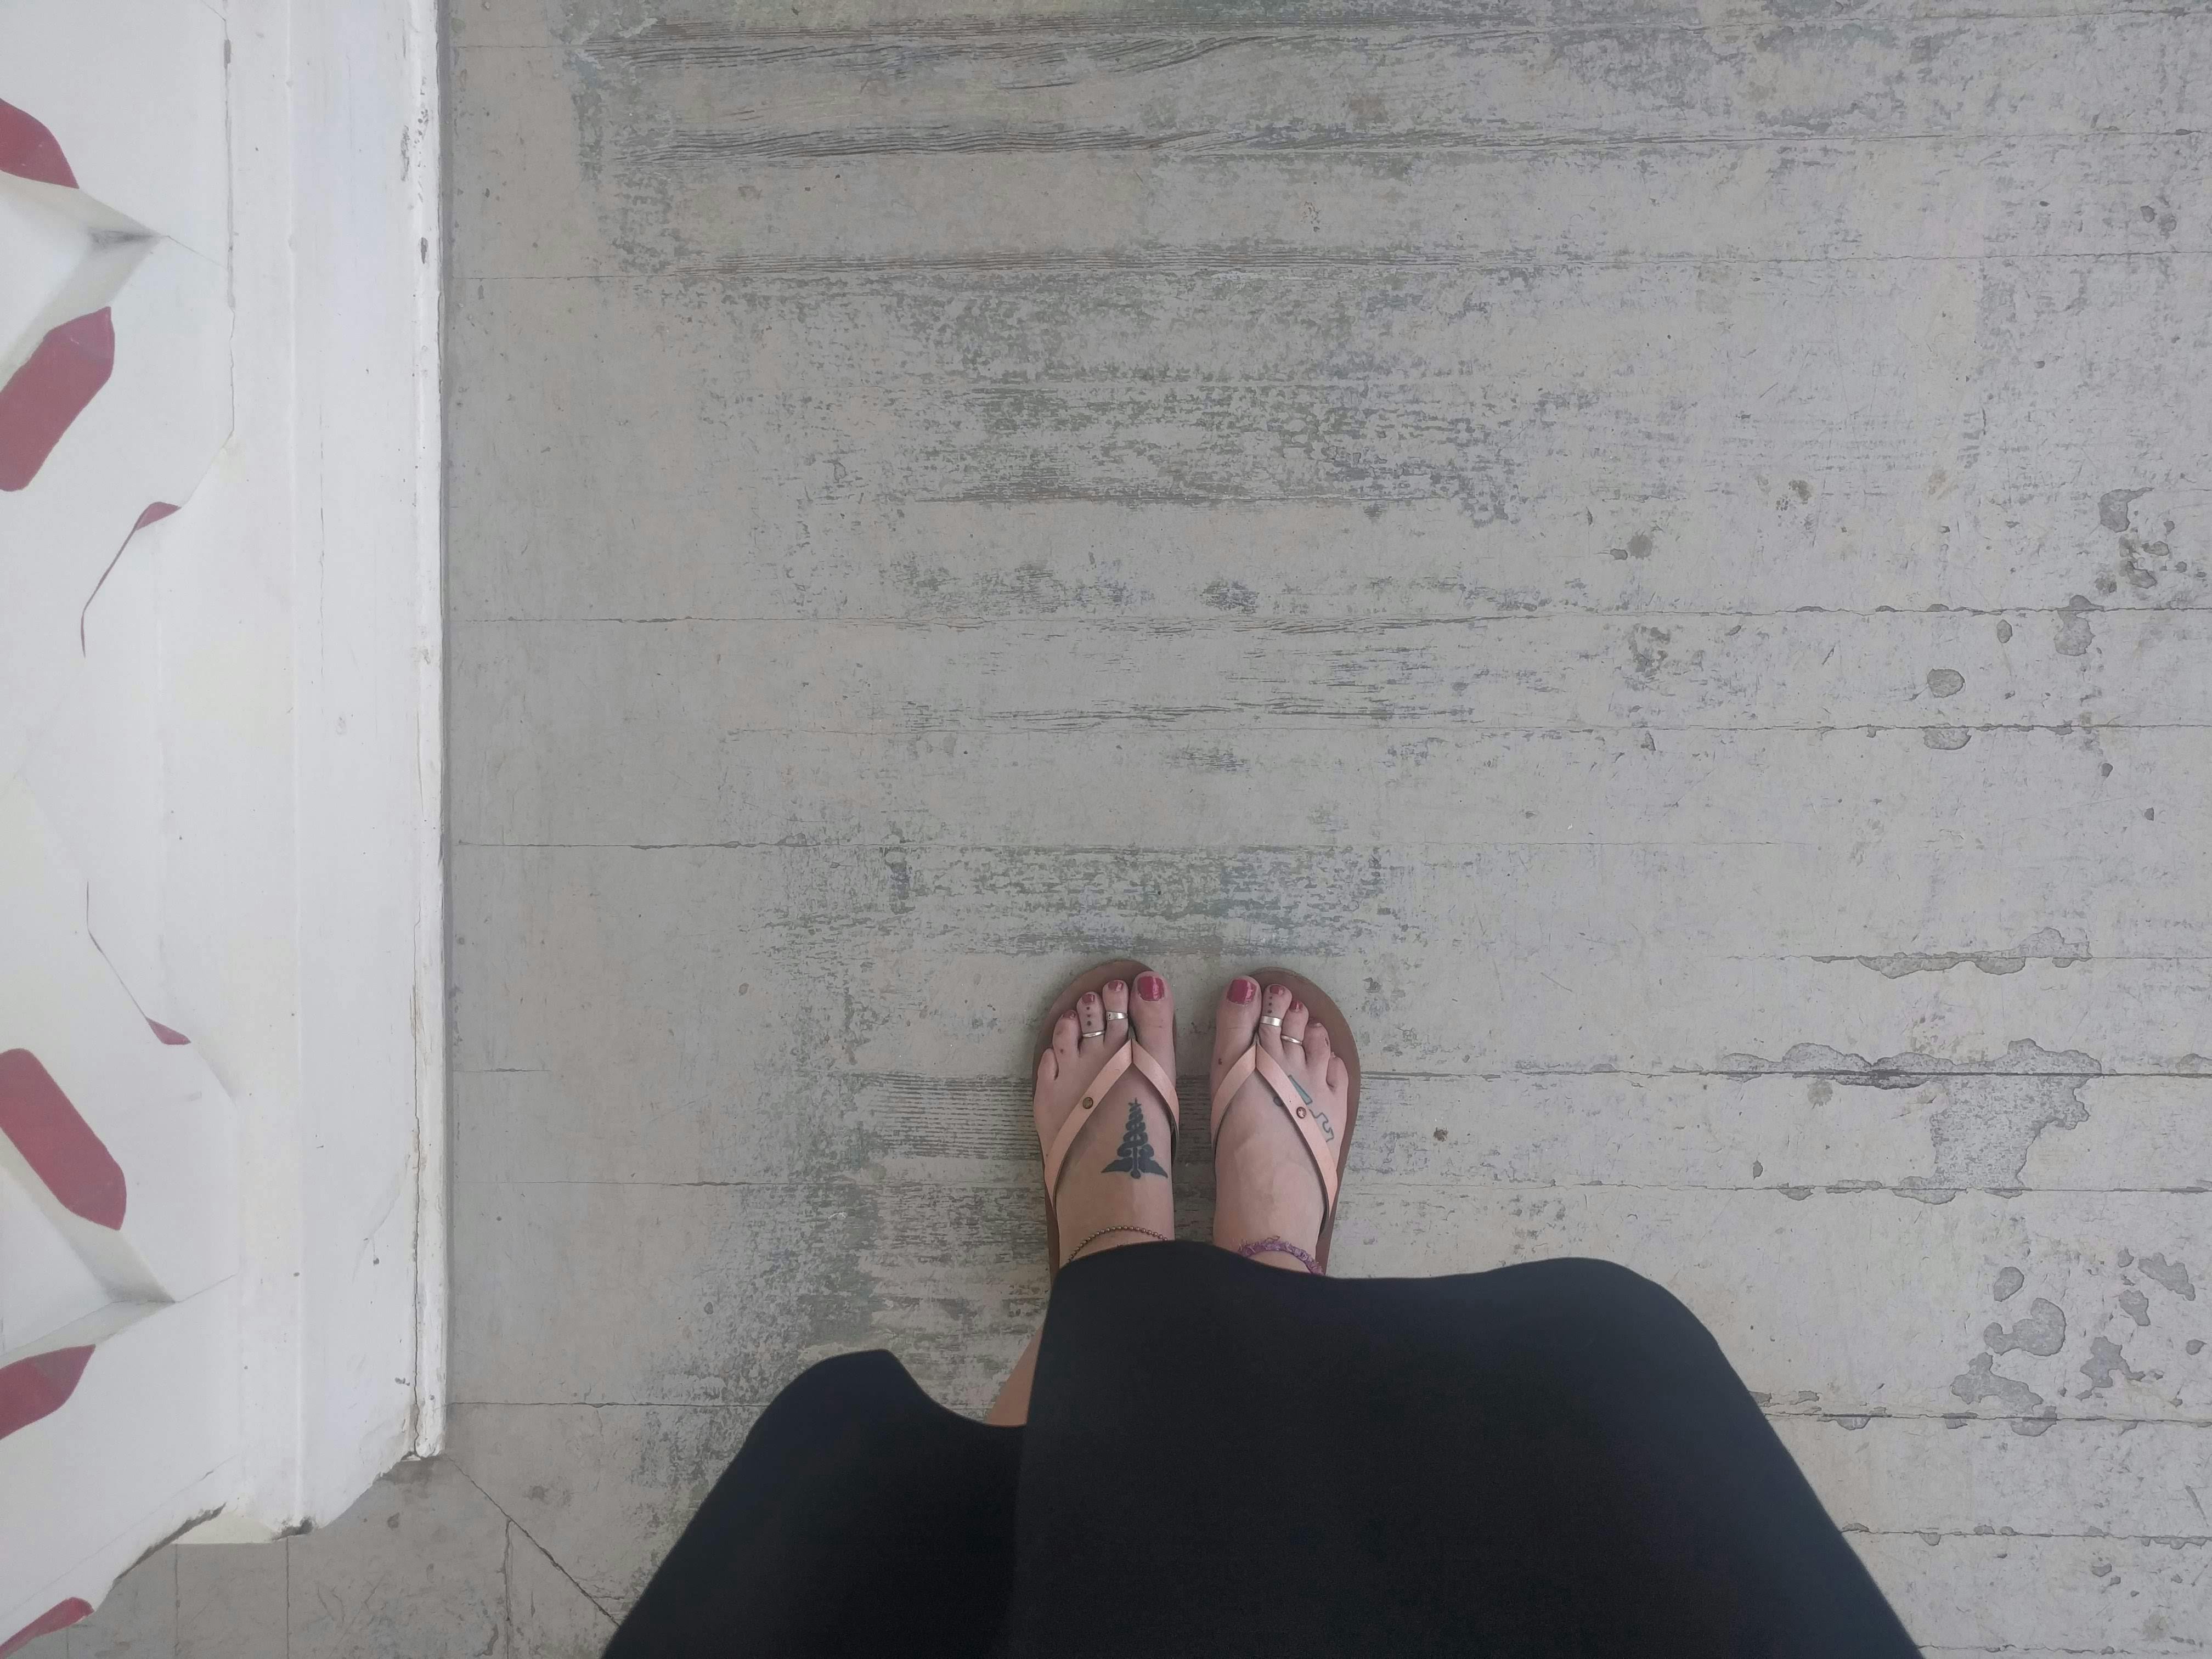 Free stock photo of Feet on wood floor by railing